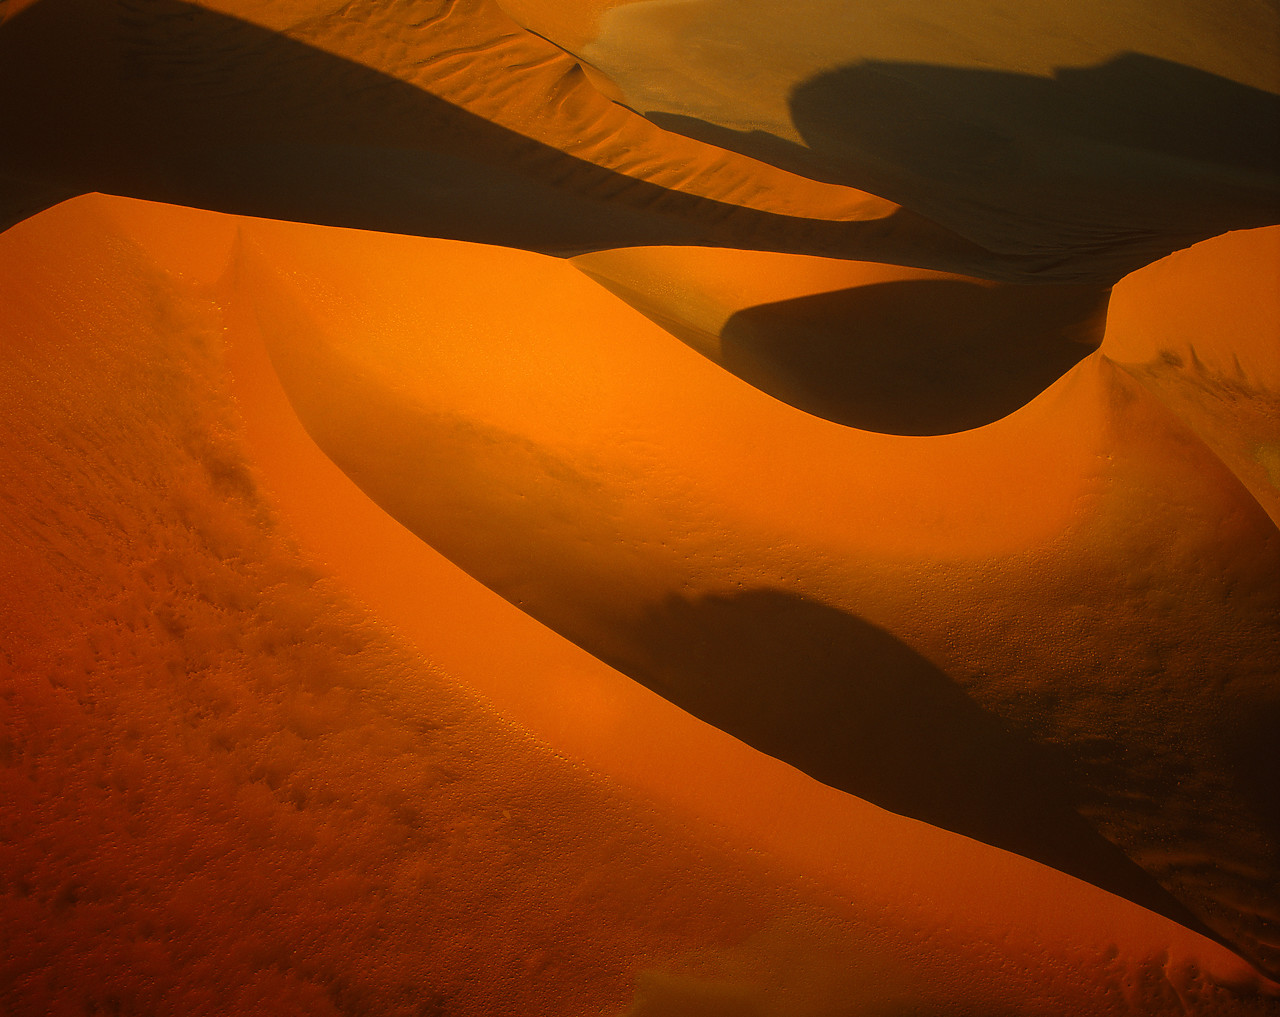 #010310-1 - Aerial View of Sand Dunes, Sossusvlei, Namibia, Africa